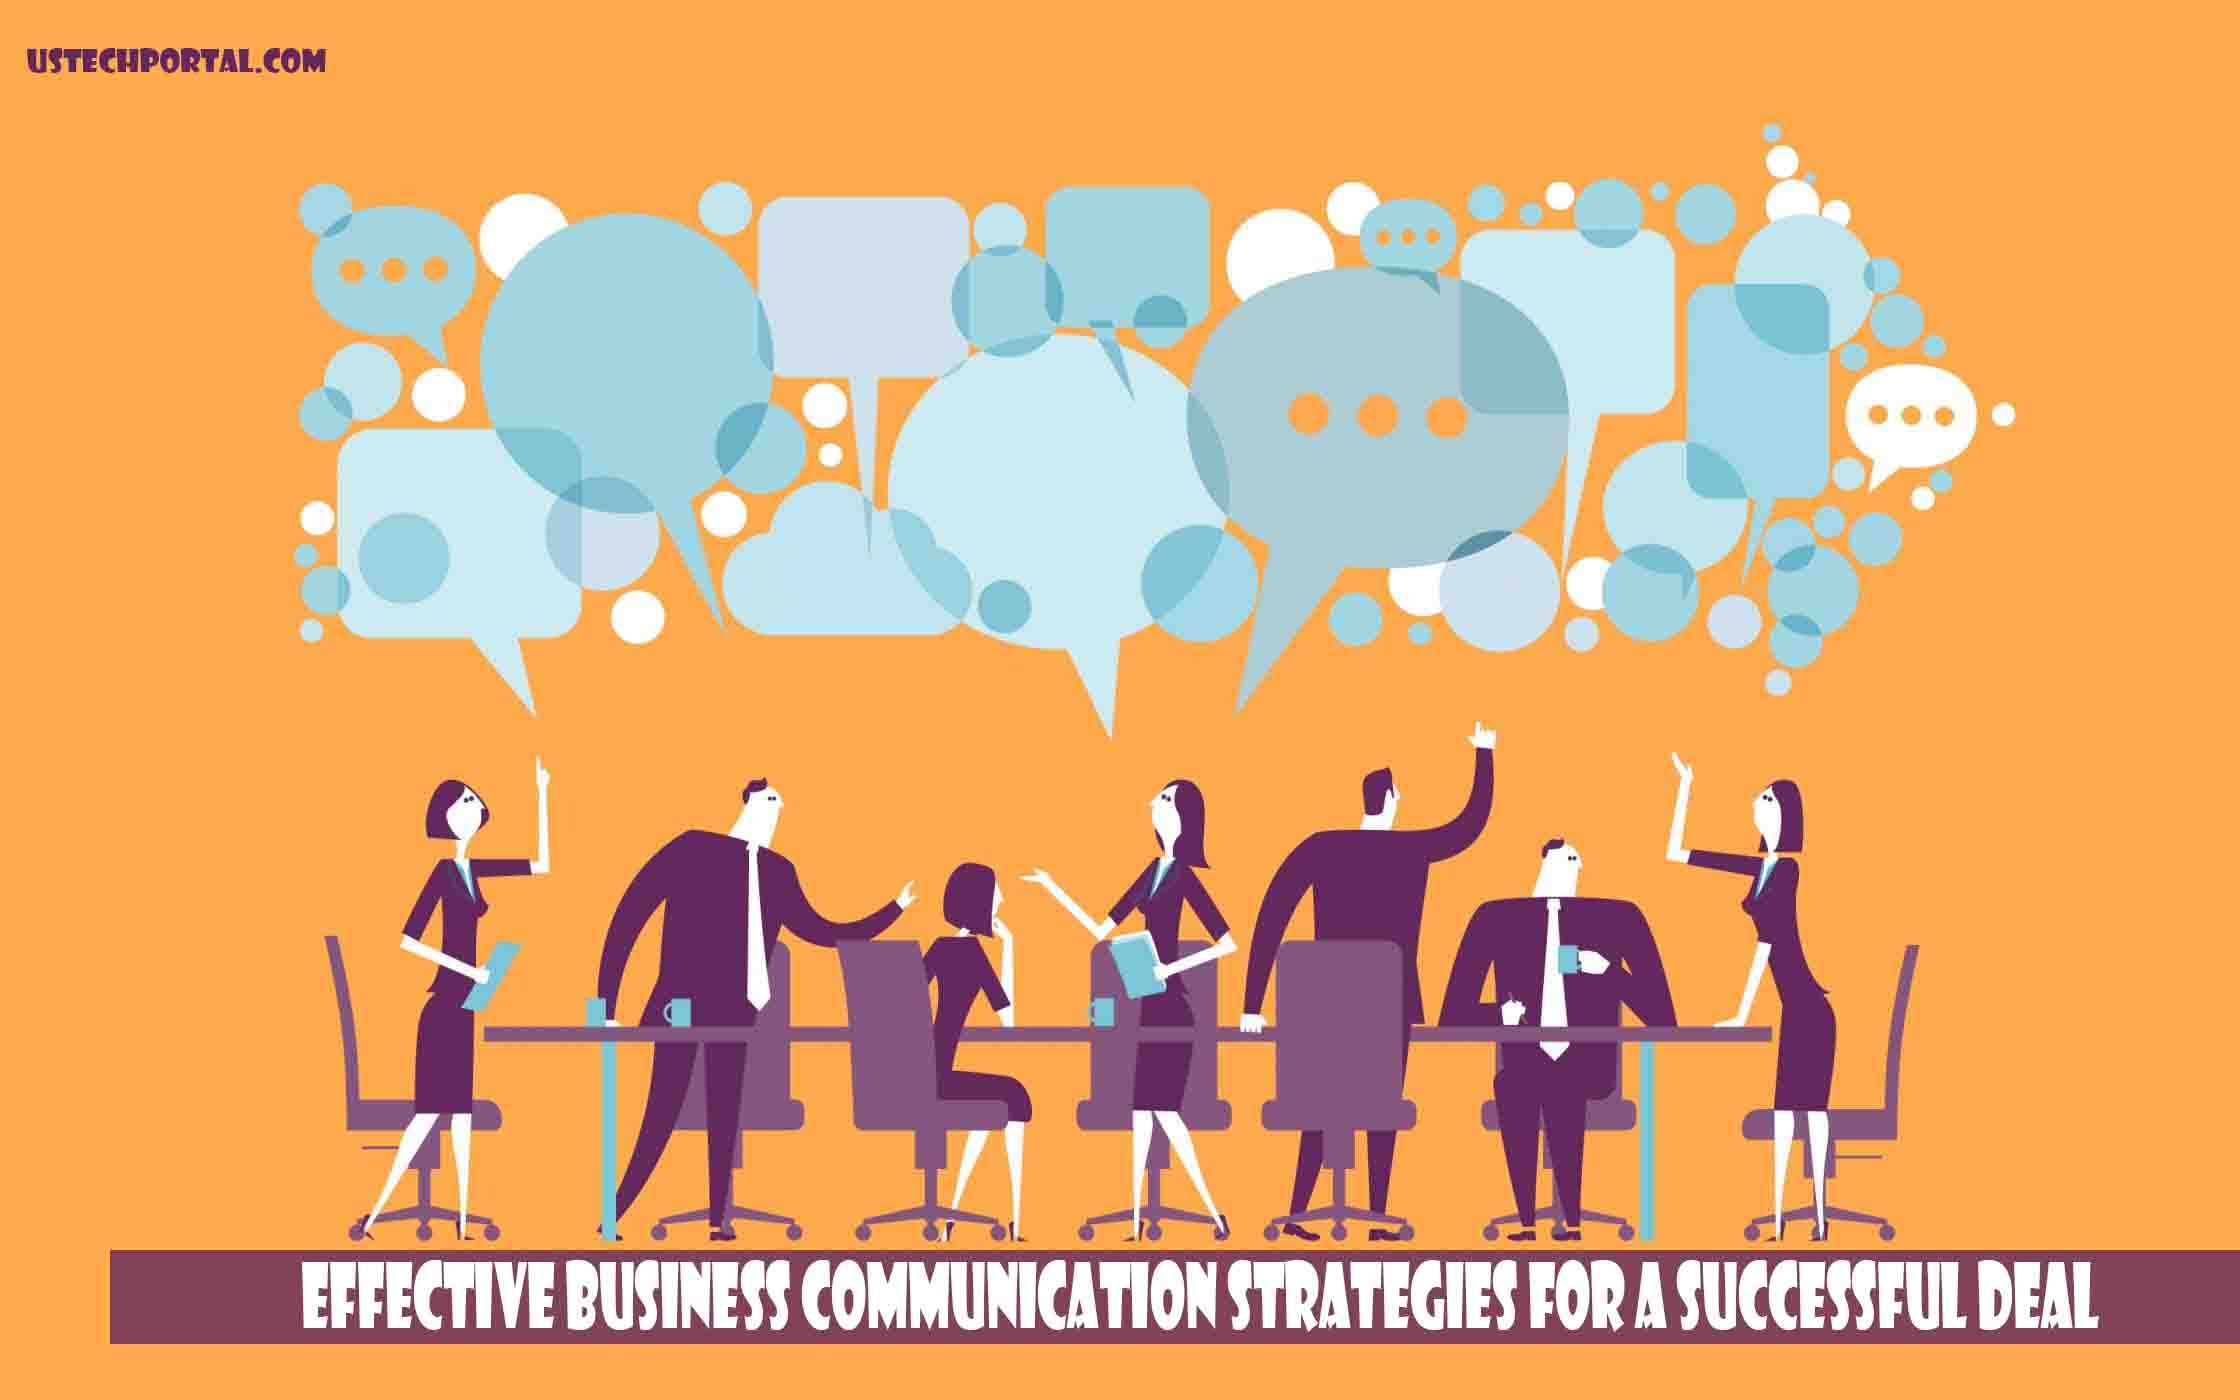 Effective Business Communication Strategies for A Successful Deal